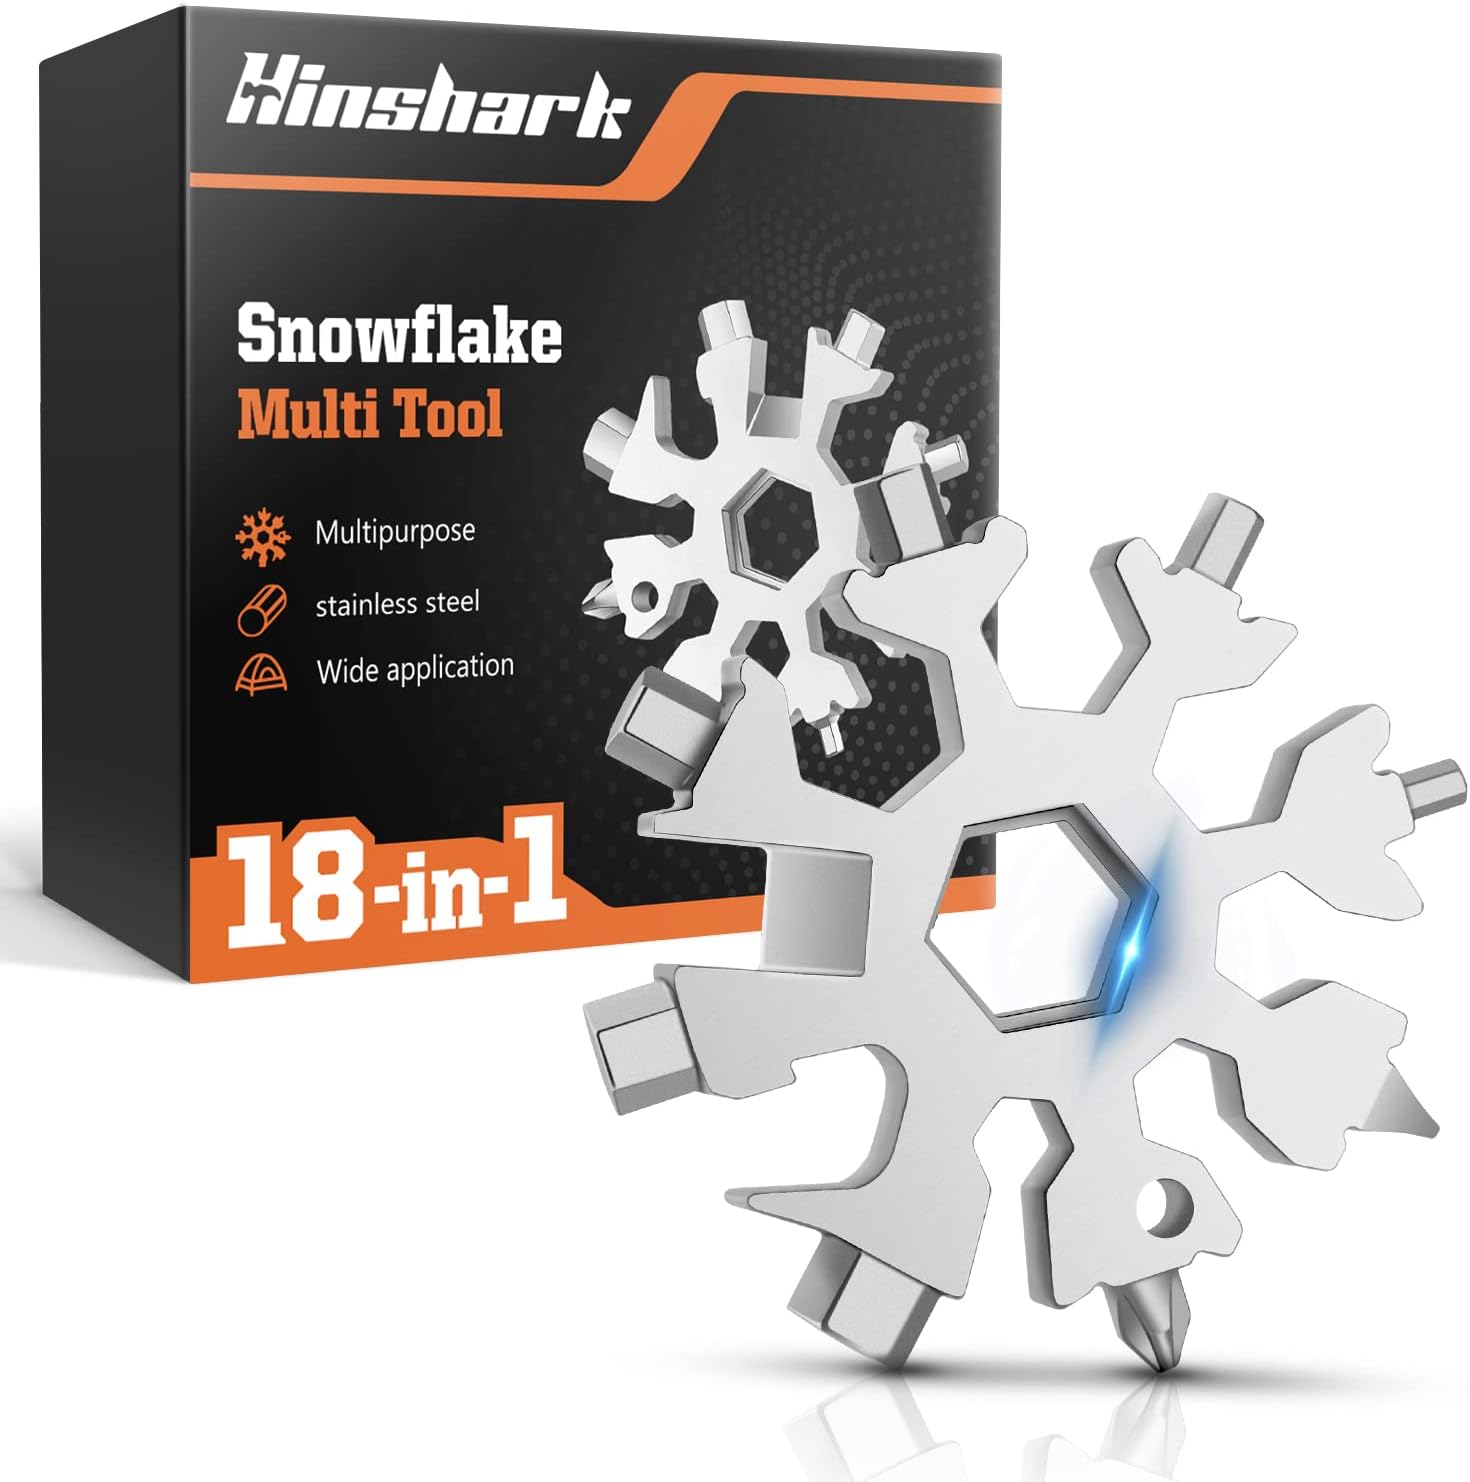 Gifts for Men, Stocking Fillers for Men/Women, 18-in-1 Snowflake Multi Tool Mens Gifts for Dad Gifts for Men Who Have Everything, Birthday Gifts for Him Gadgets for Men, Mens Gifts for Christmas